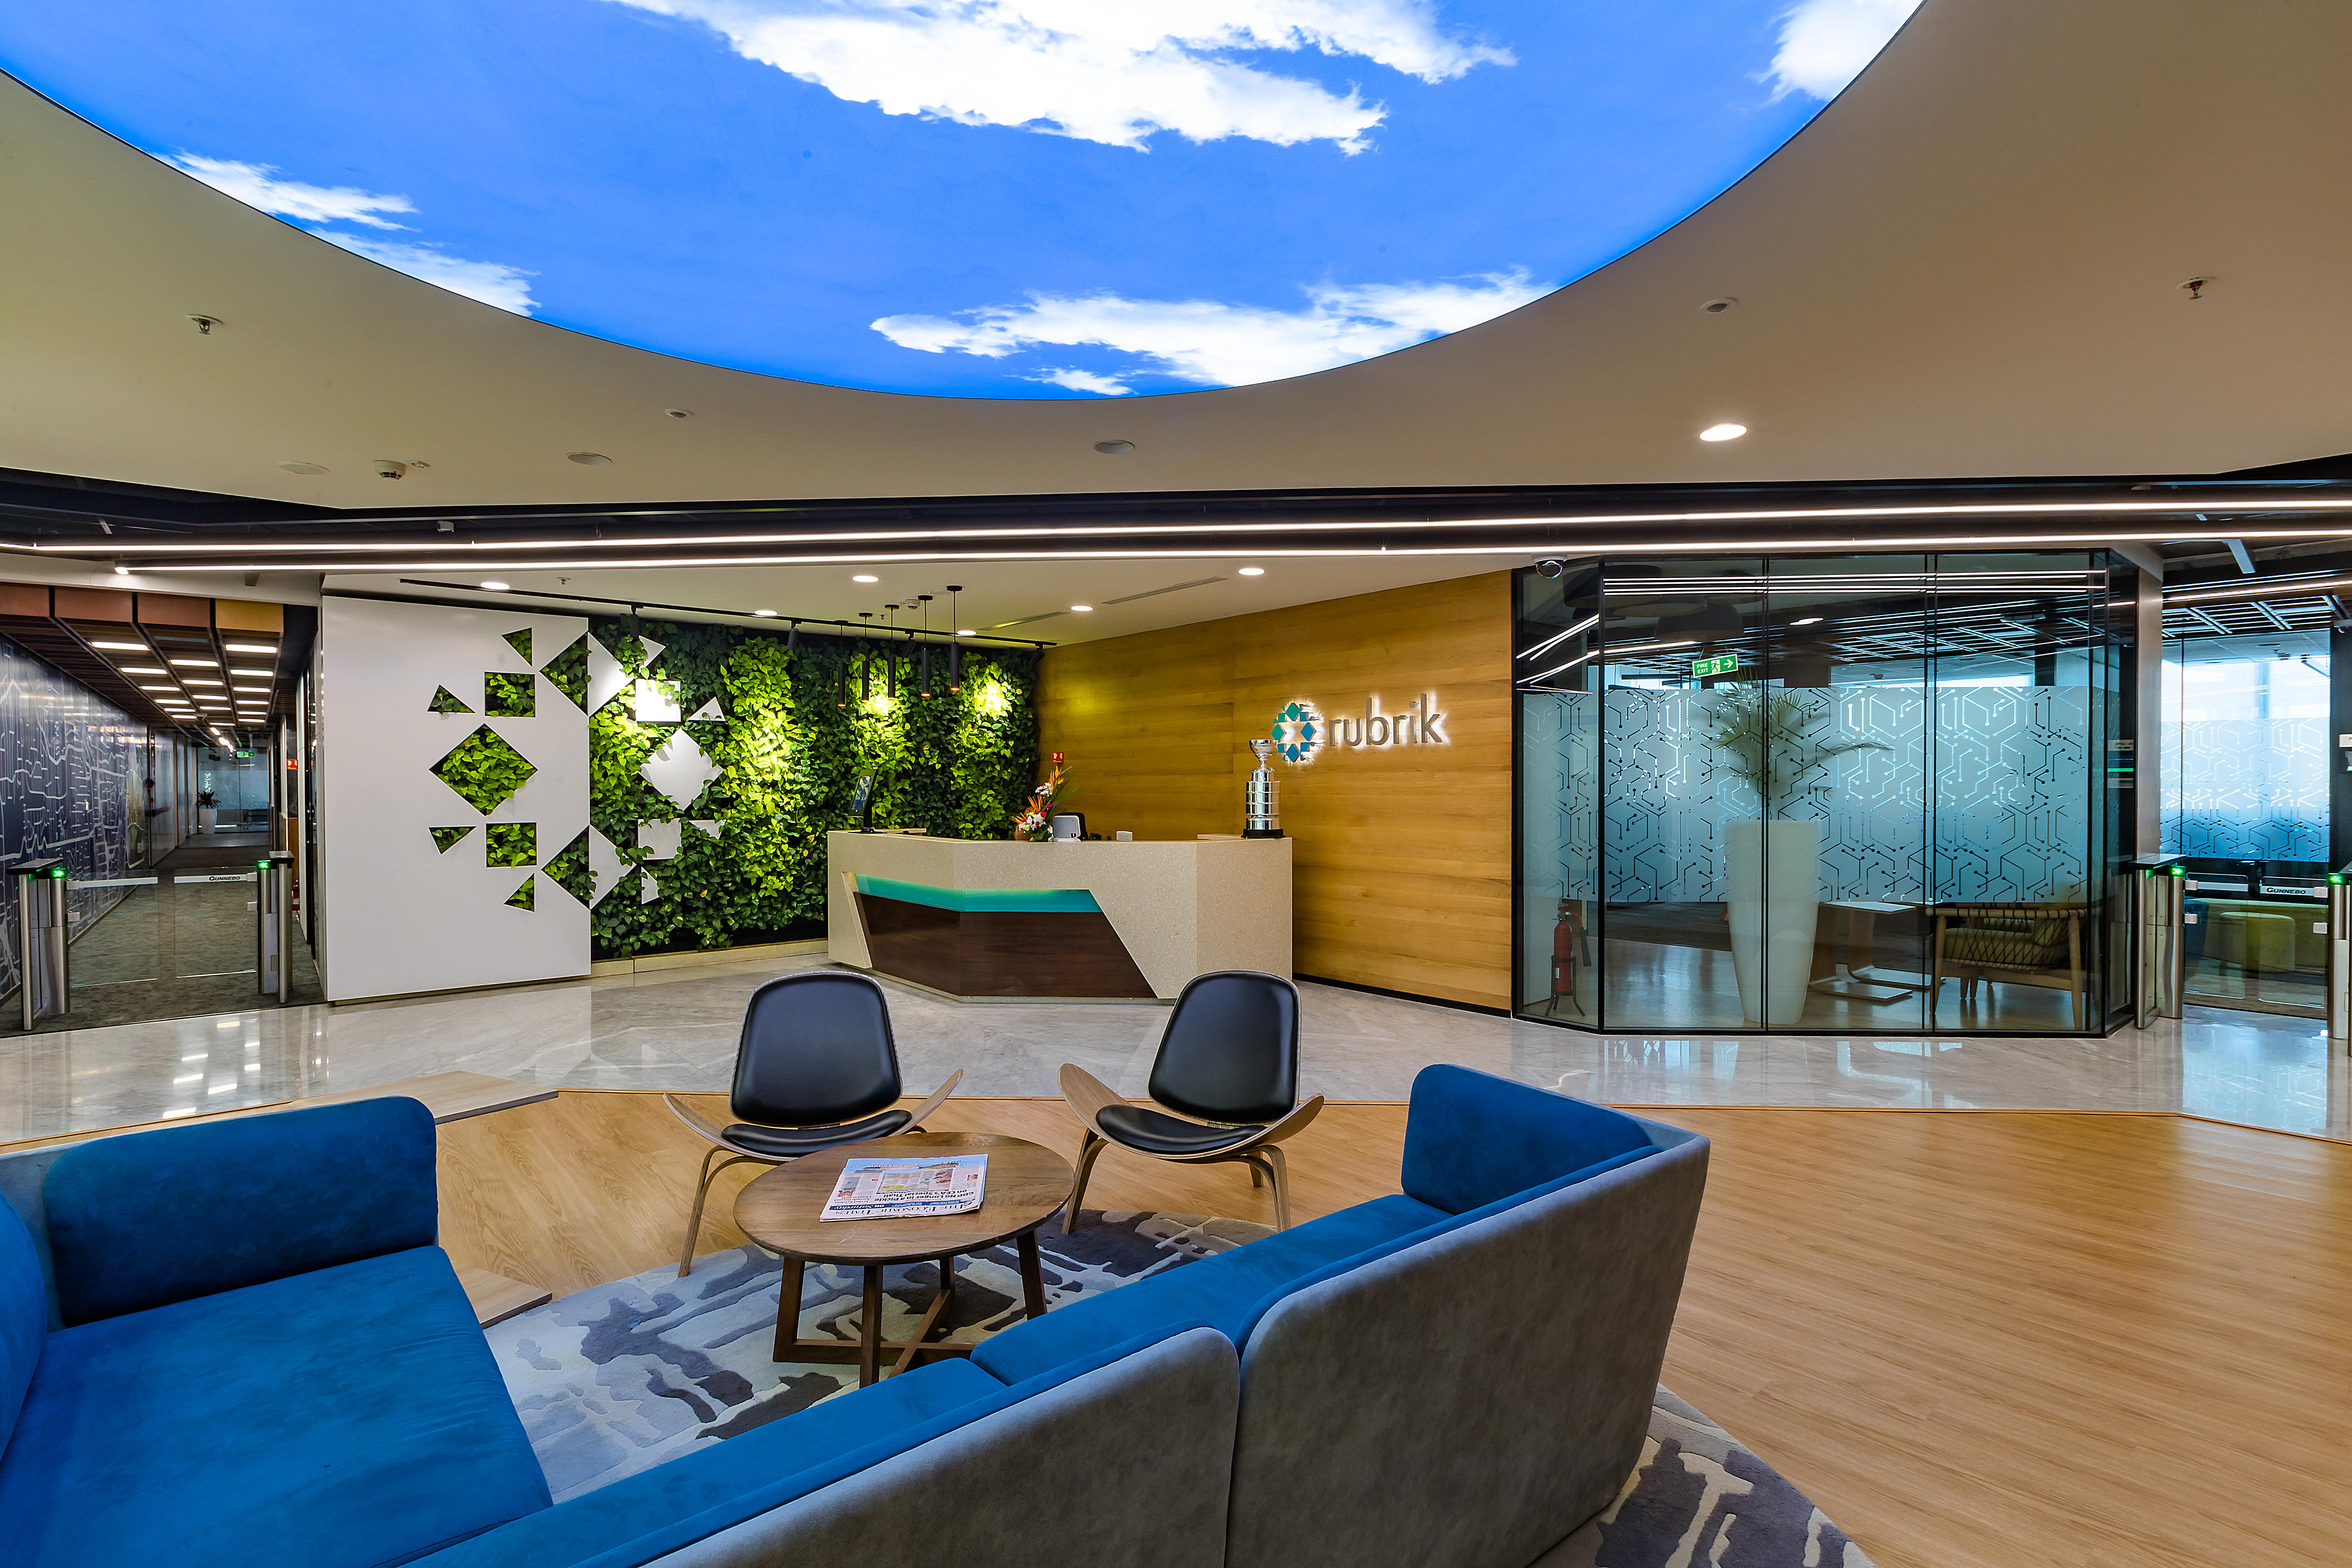 Space Matrix focussed on creating the best workplace design for Rubrik India that would cater to the wellbeing of its employees and achieve sustainability objectives